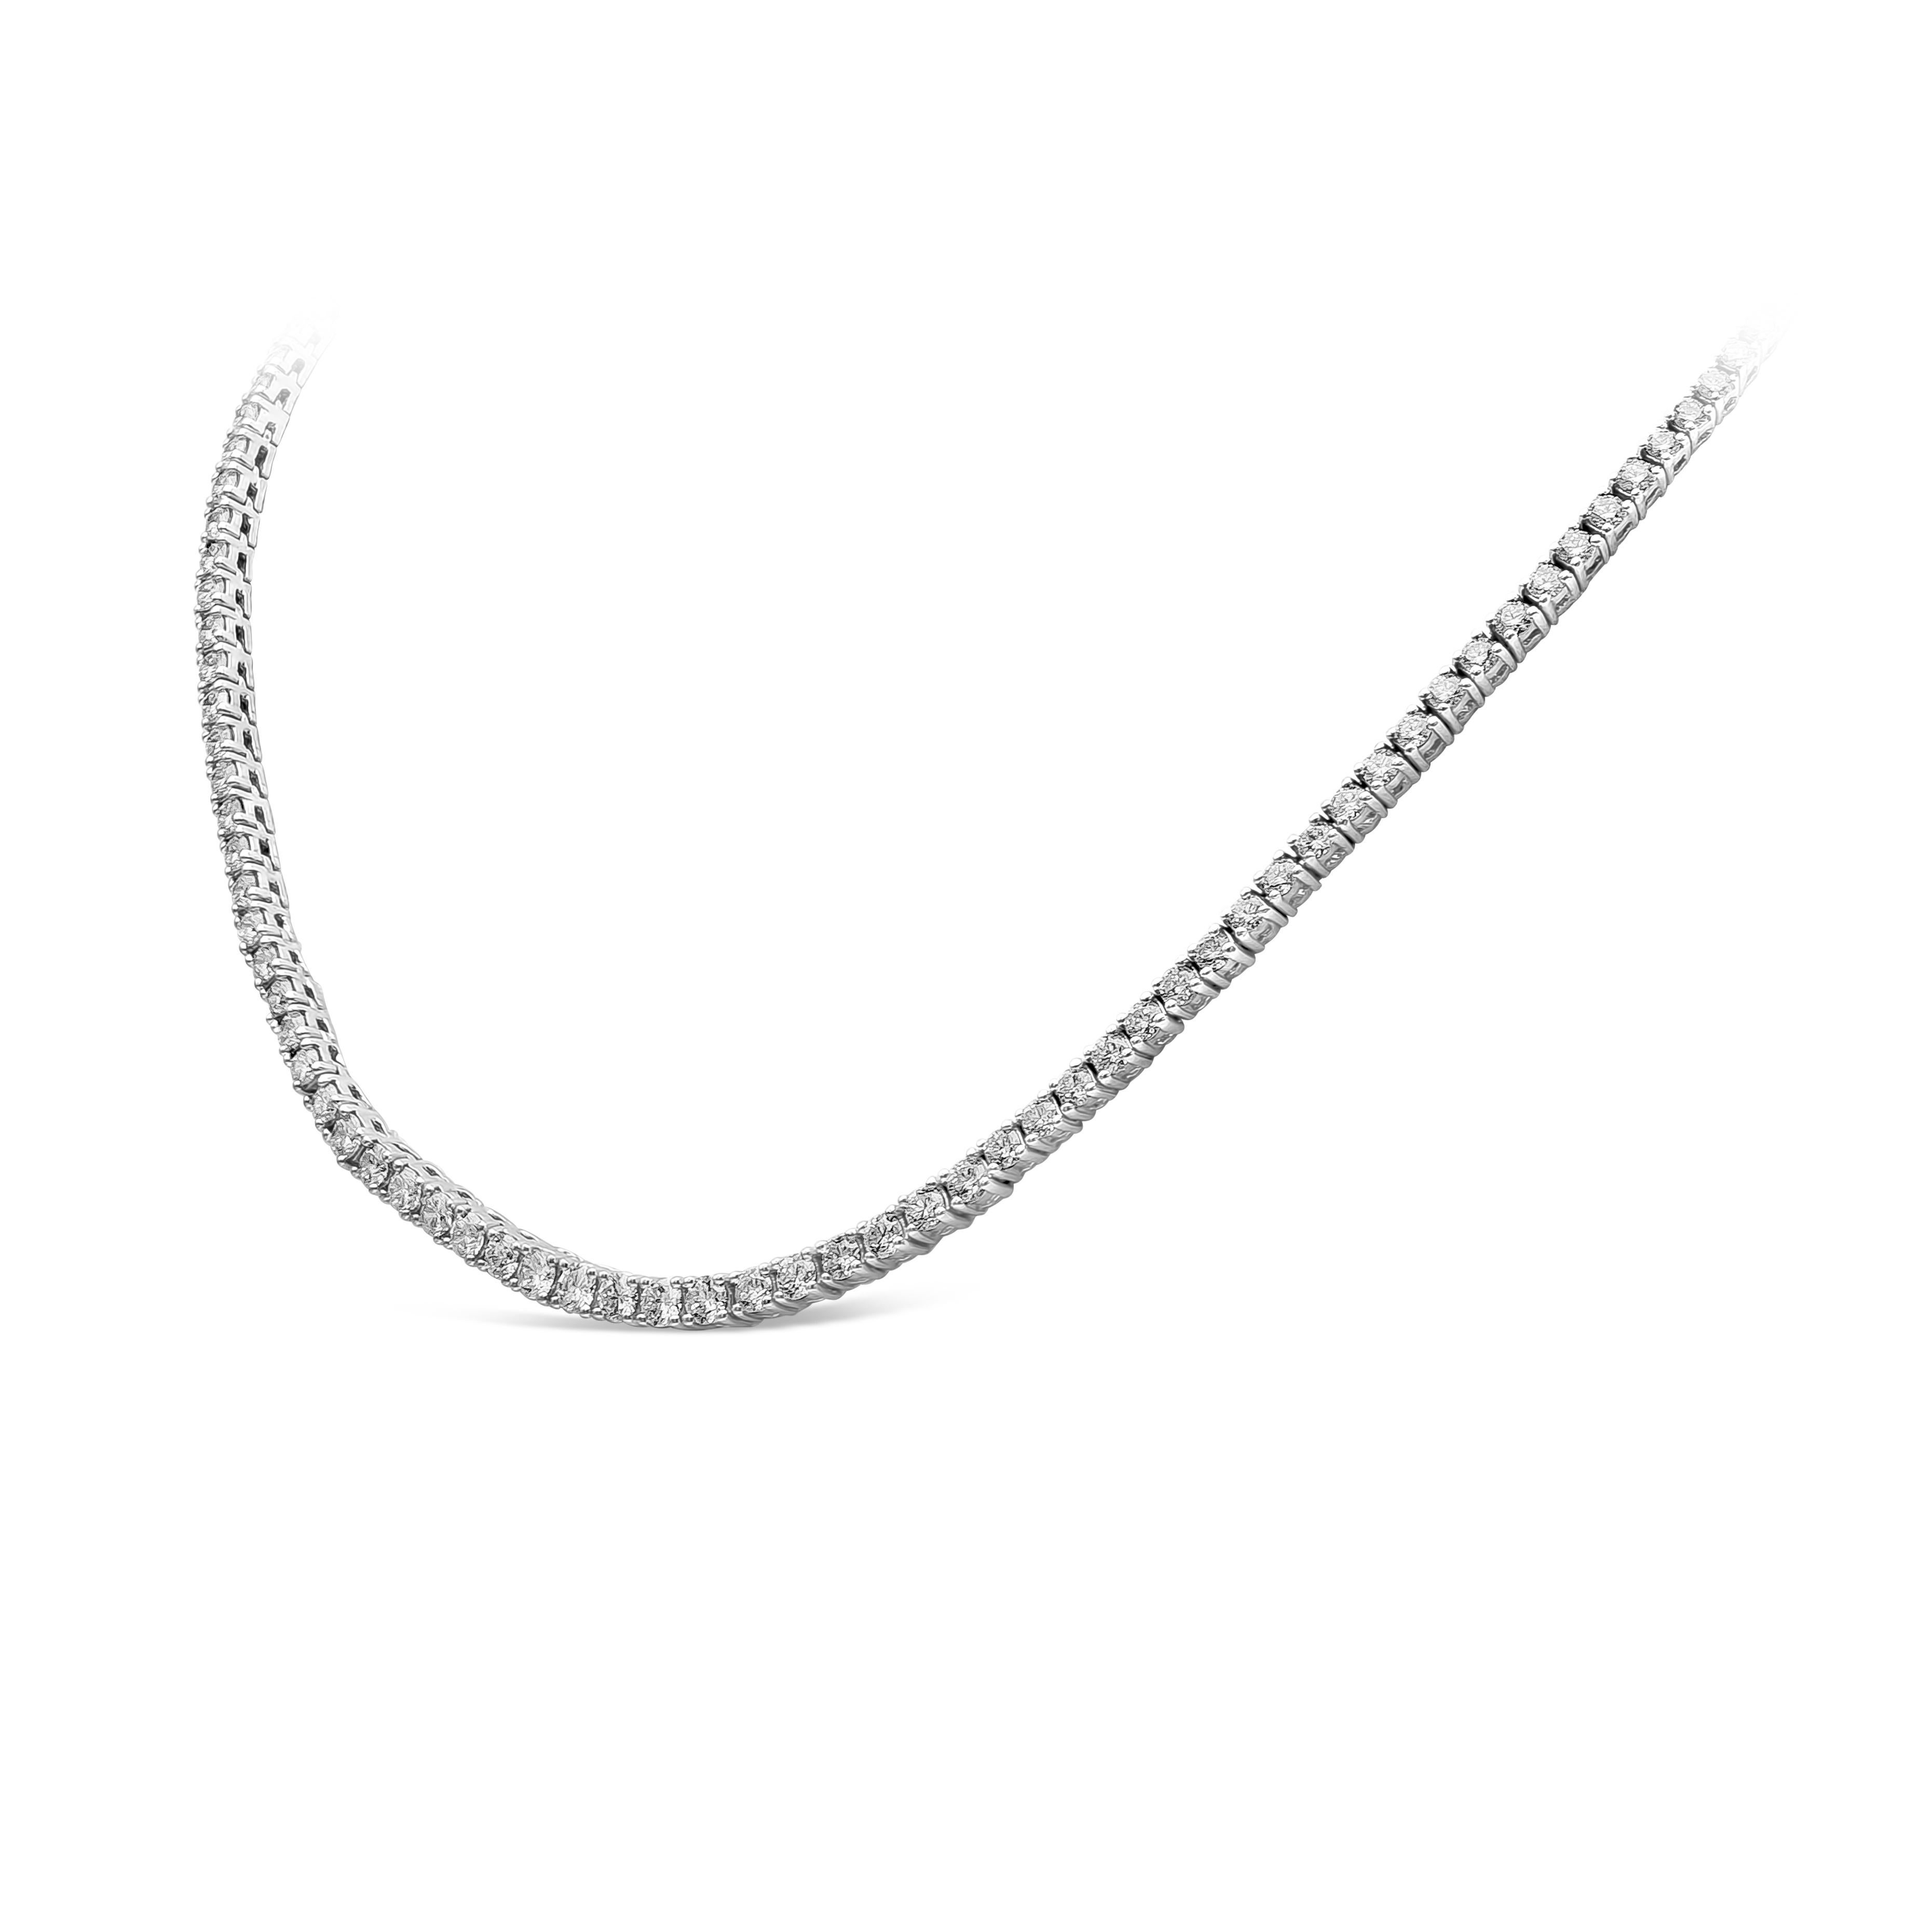 This fine dazzling slight graduation fashion necklace features 9.41 carats round brilliant diamonds, F-G in Color and VS-SI in Clarity. Set in a classic four-prong setting, finely crafted 18K White Gold.

Style available in different price ranges.